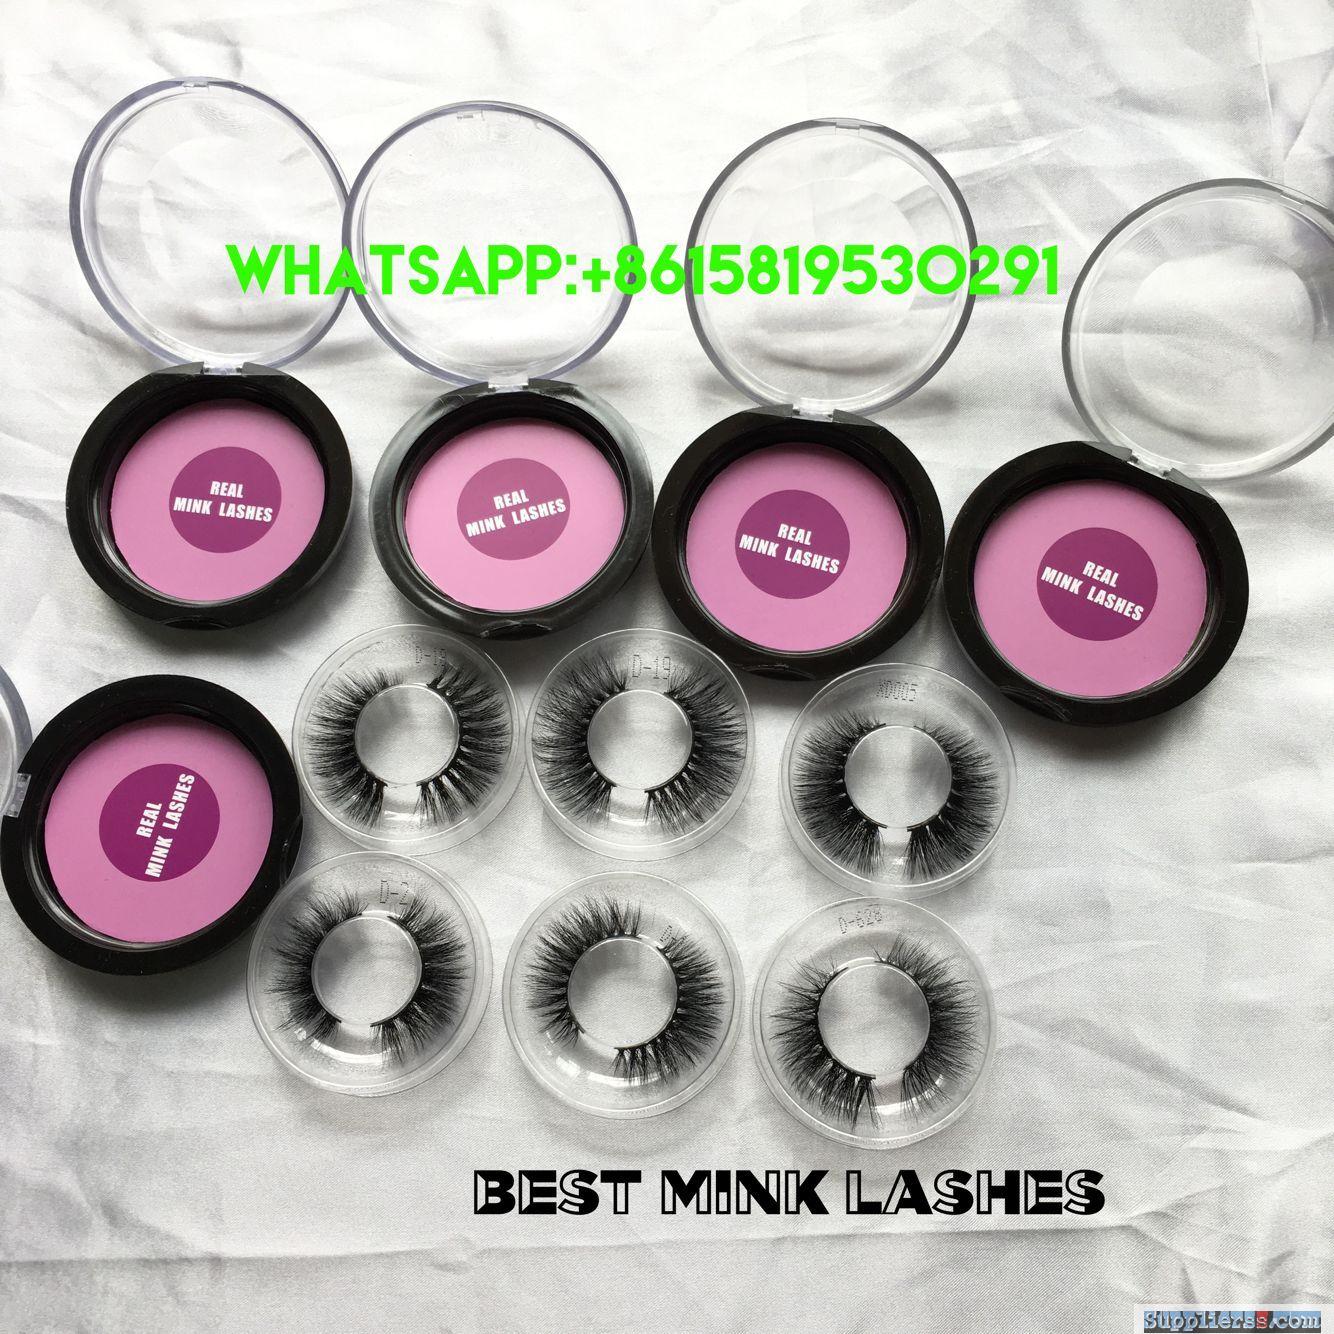 Best Mink Lashes For Sale